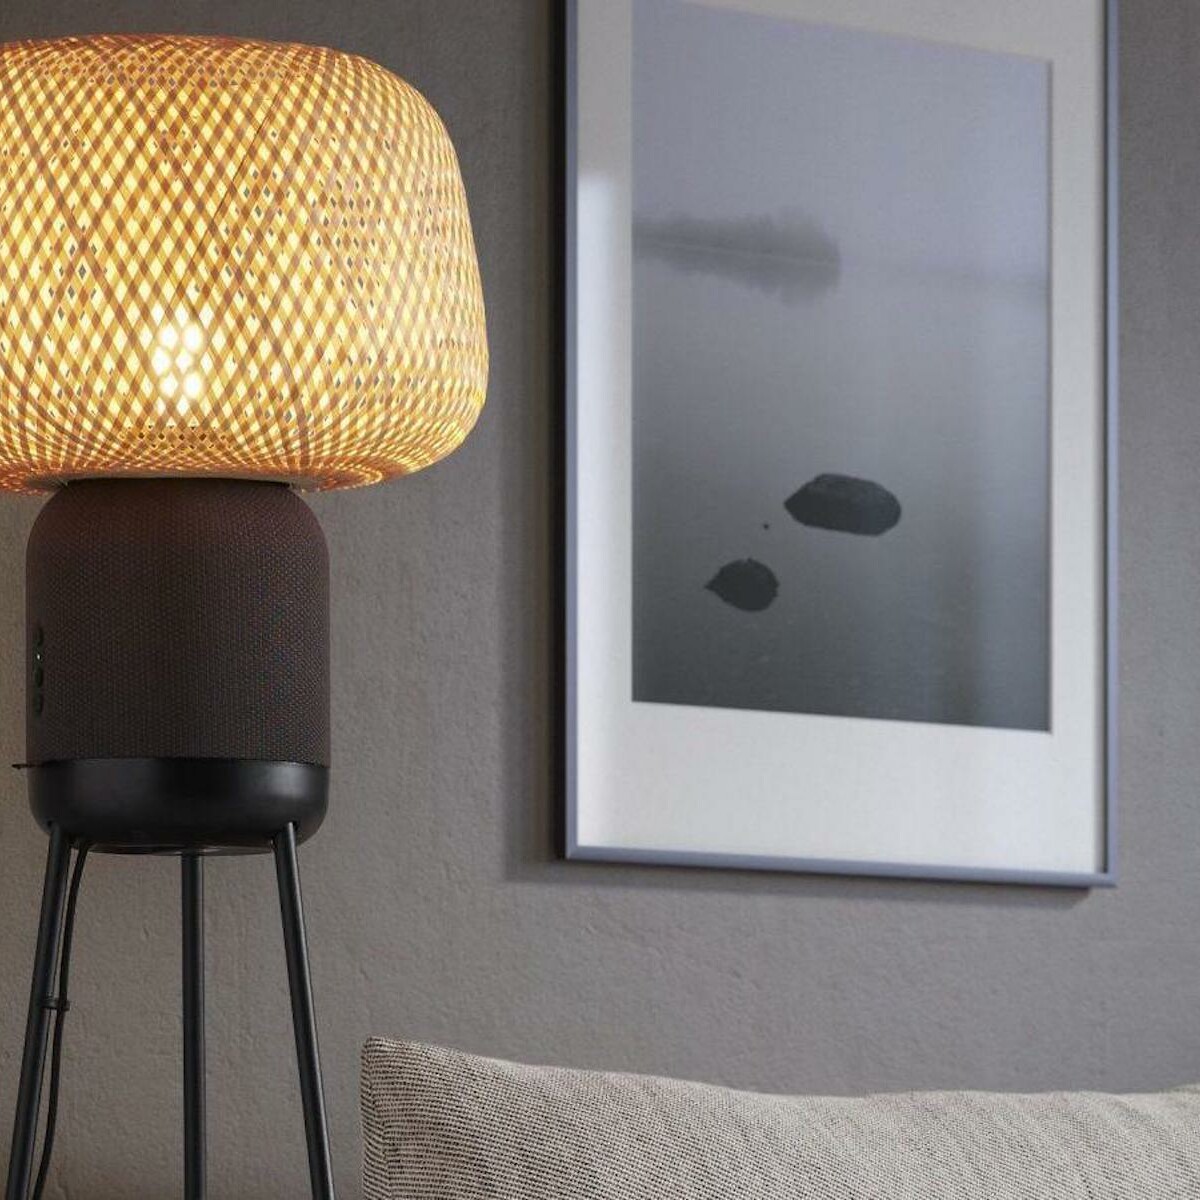 Best speaker lamps the future of home entertainment and decor blog featured 1200x1200 tmReDU